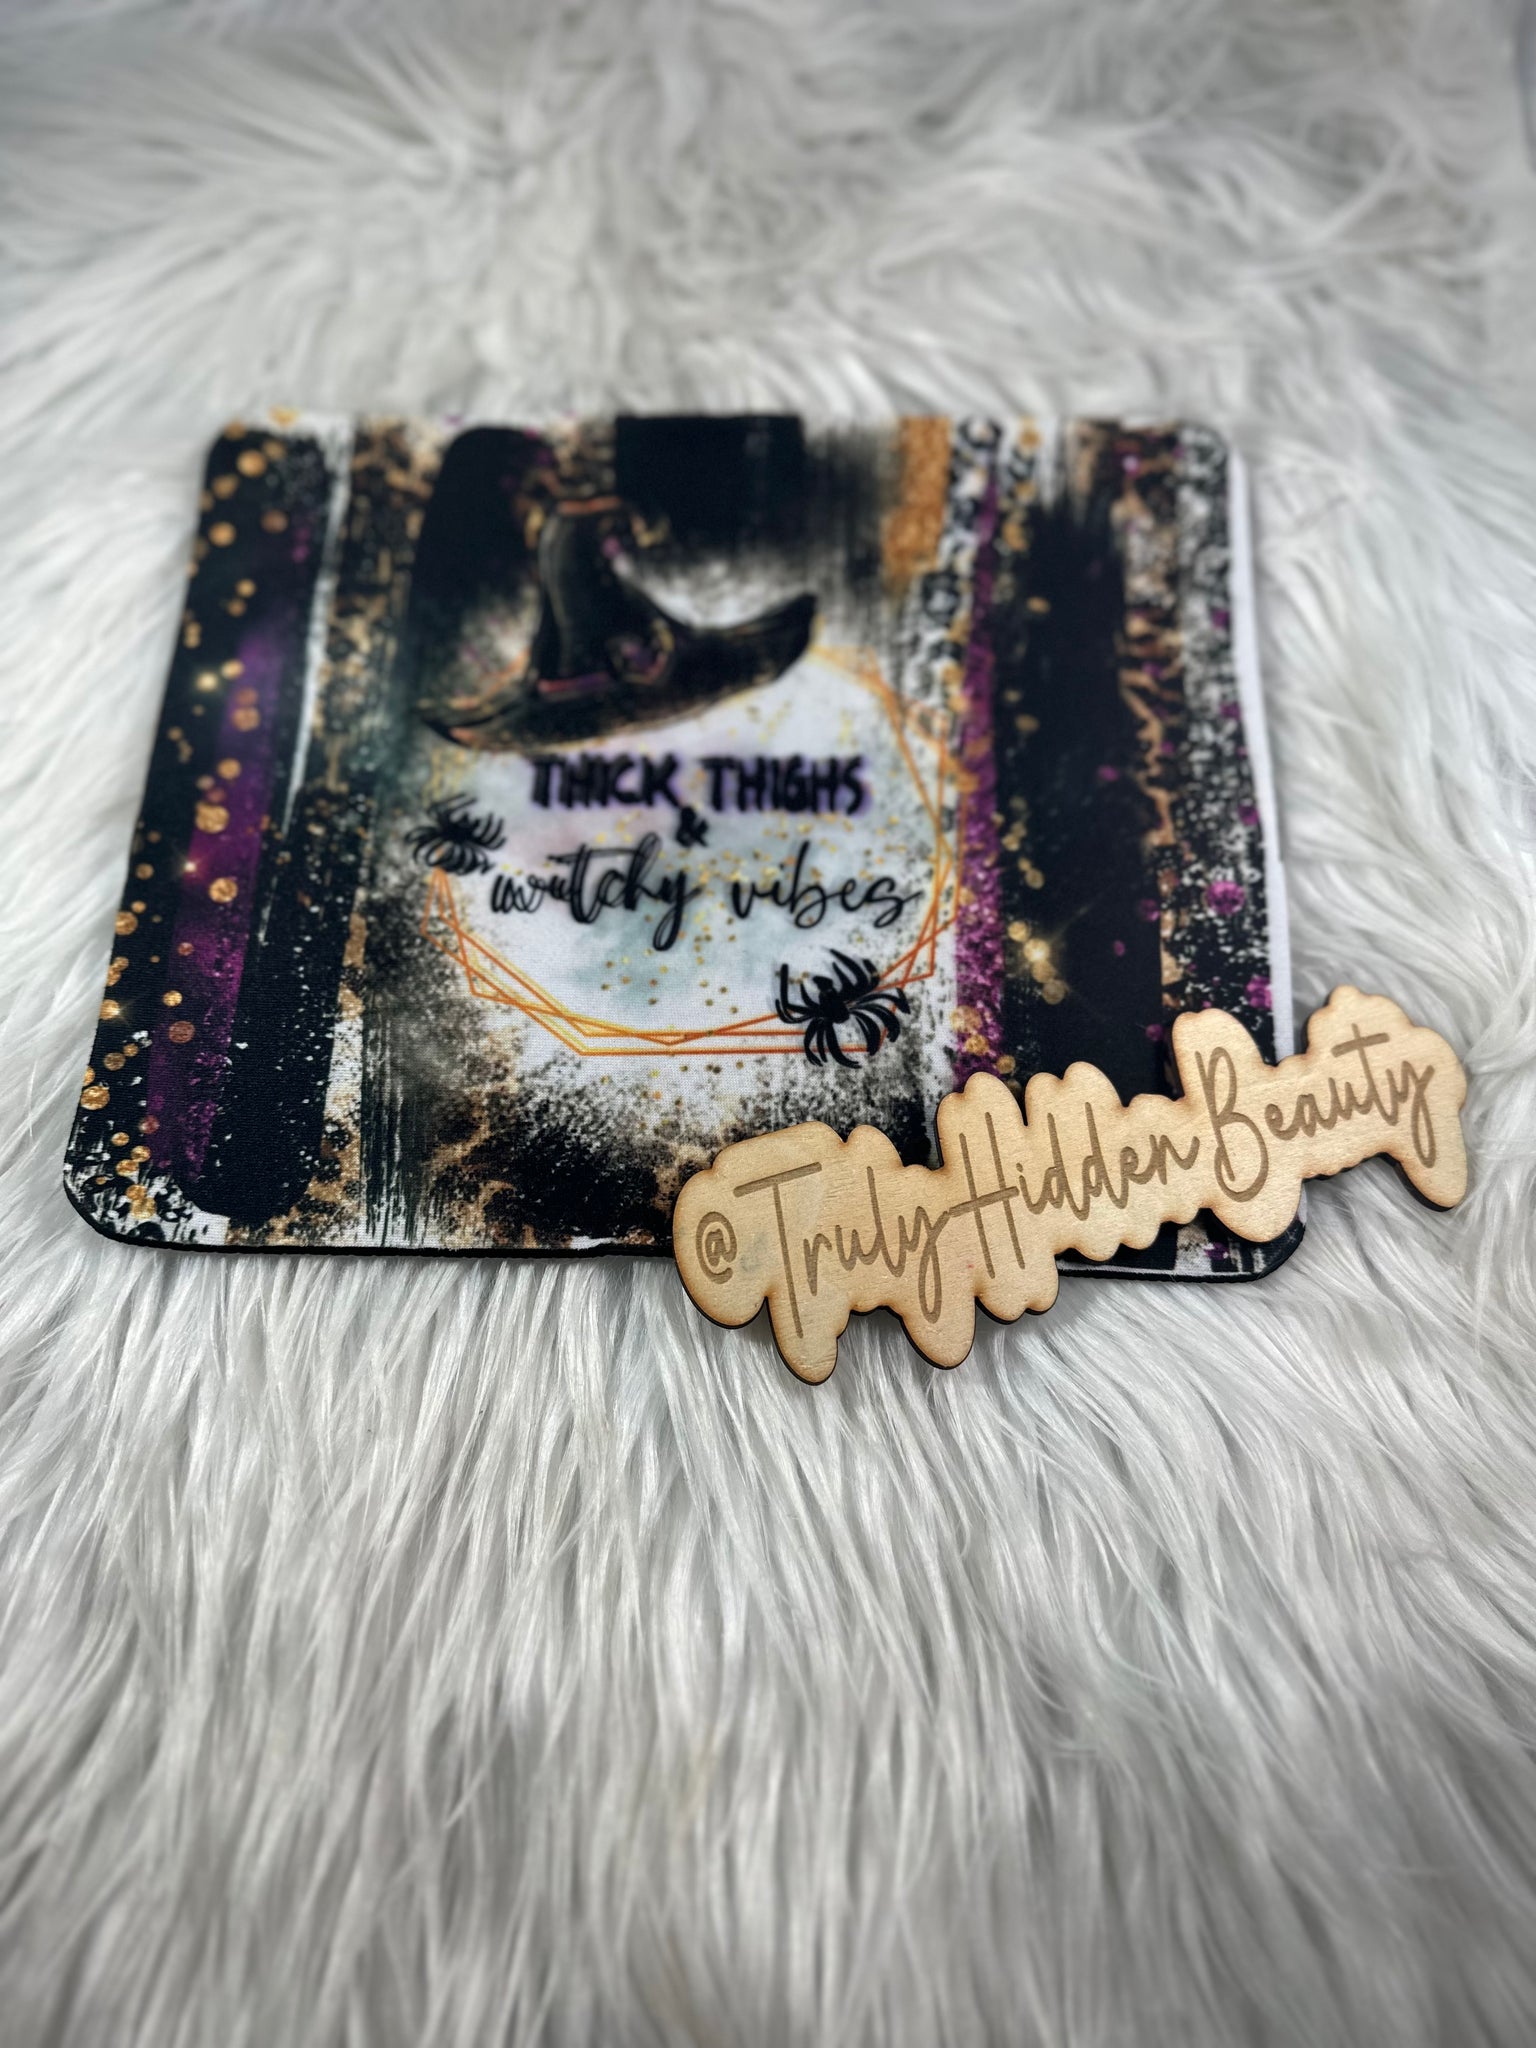 Thick thighs & witchy vibes mouse pad